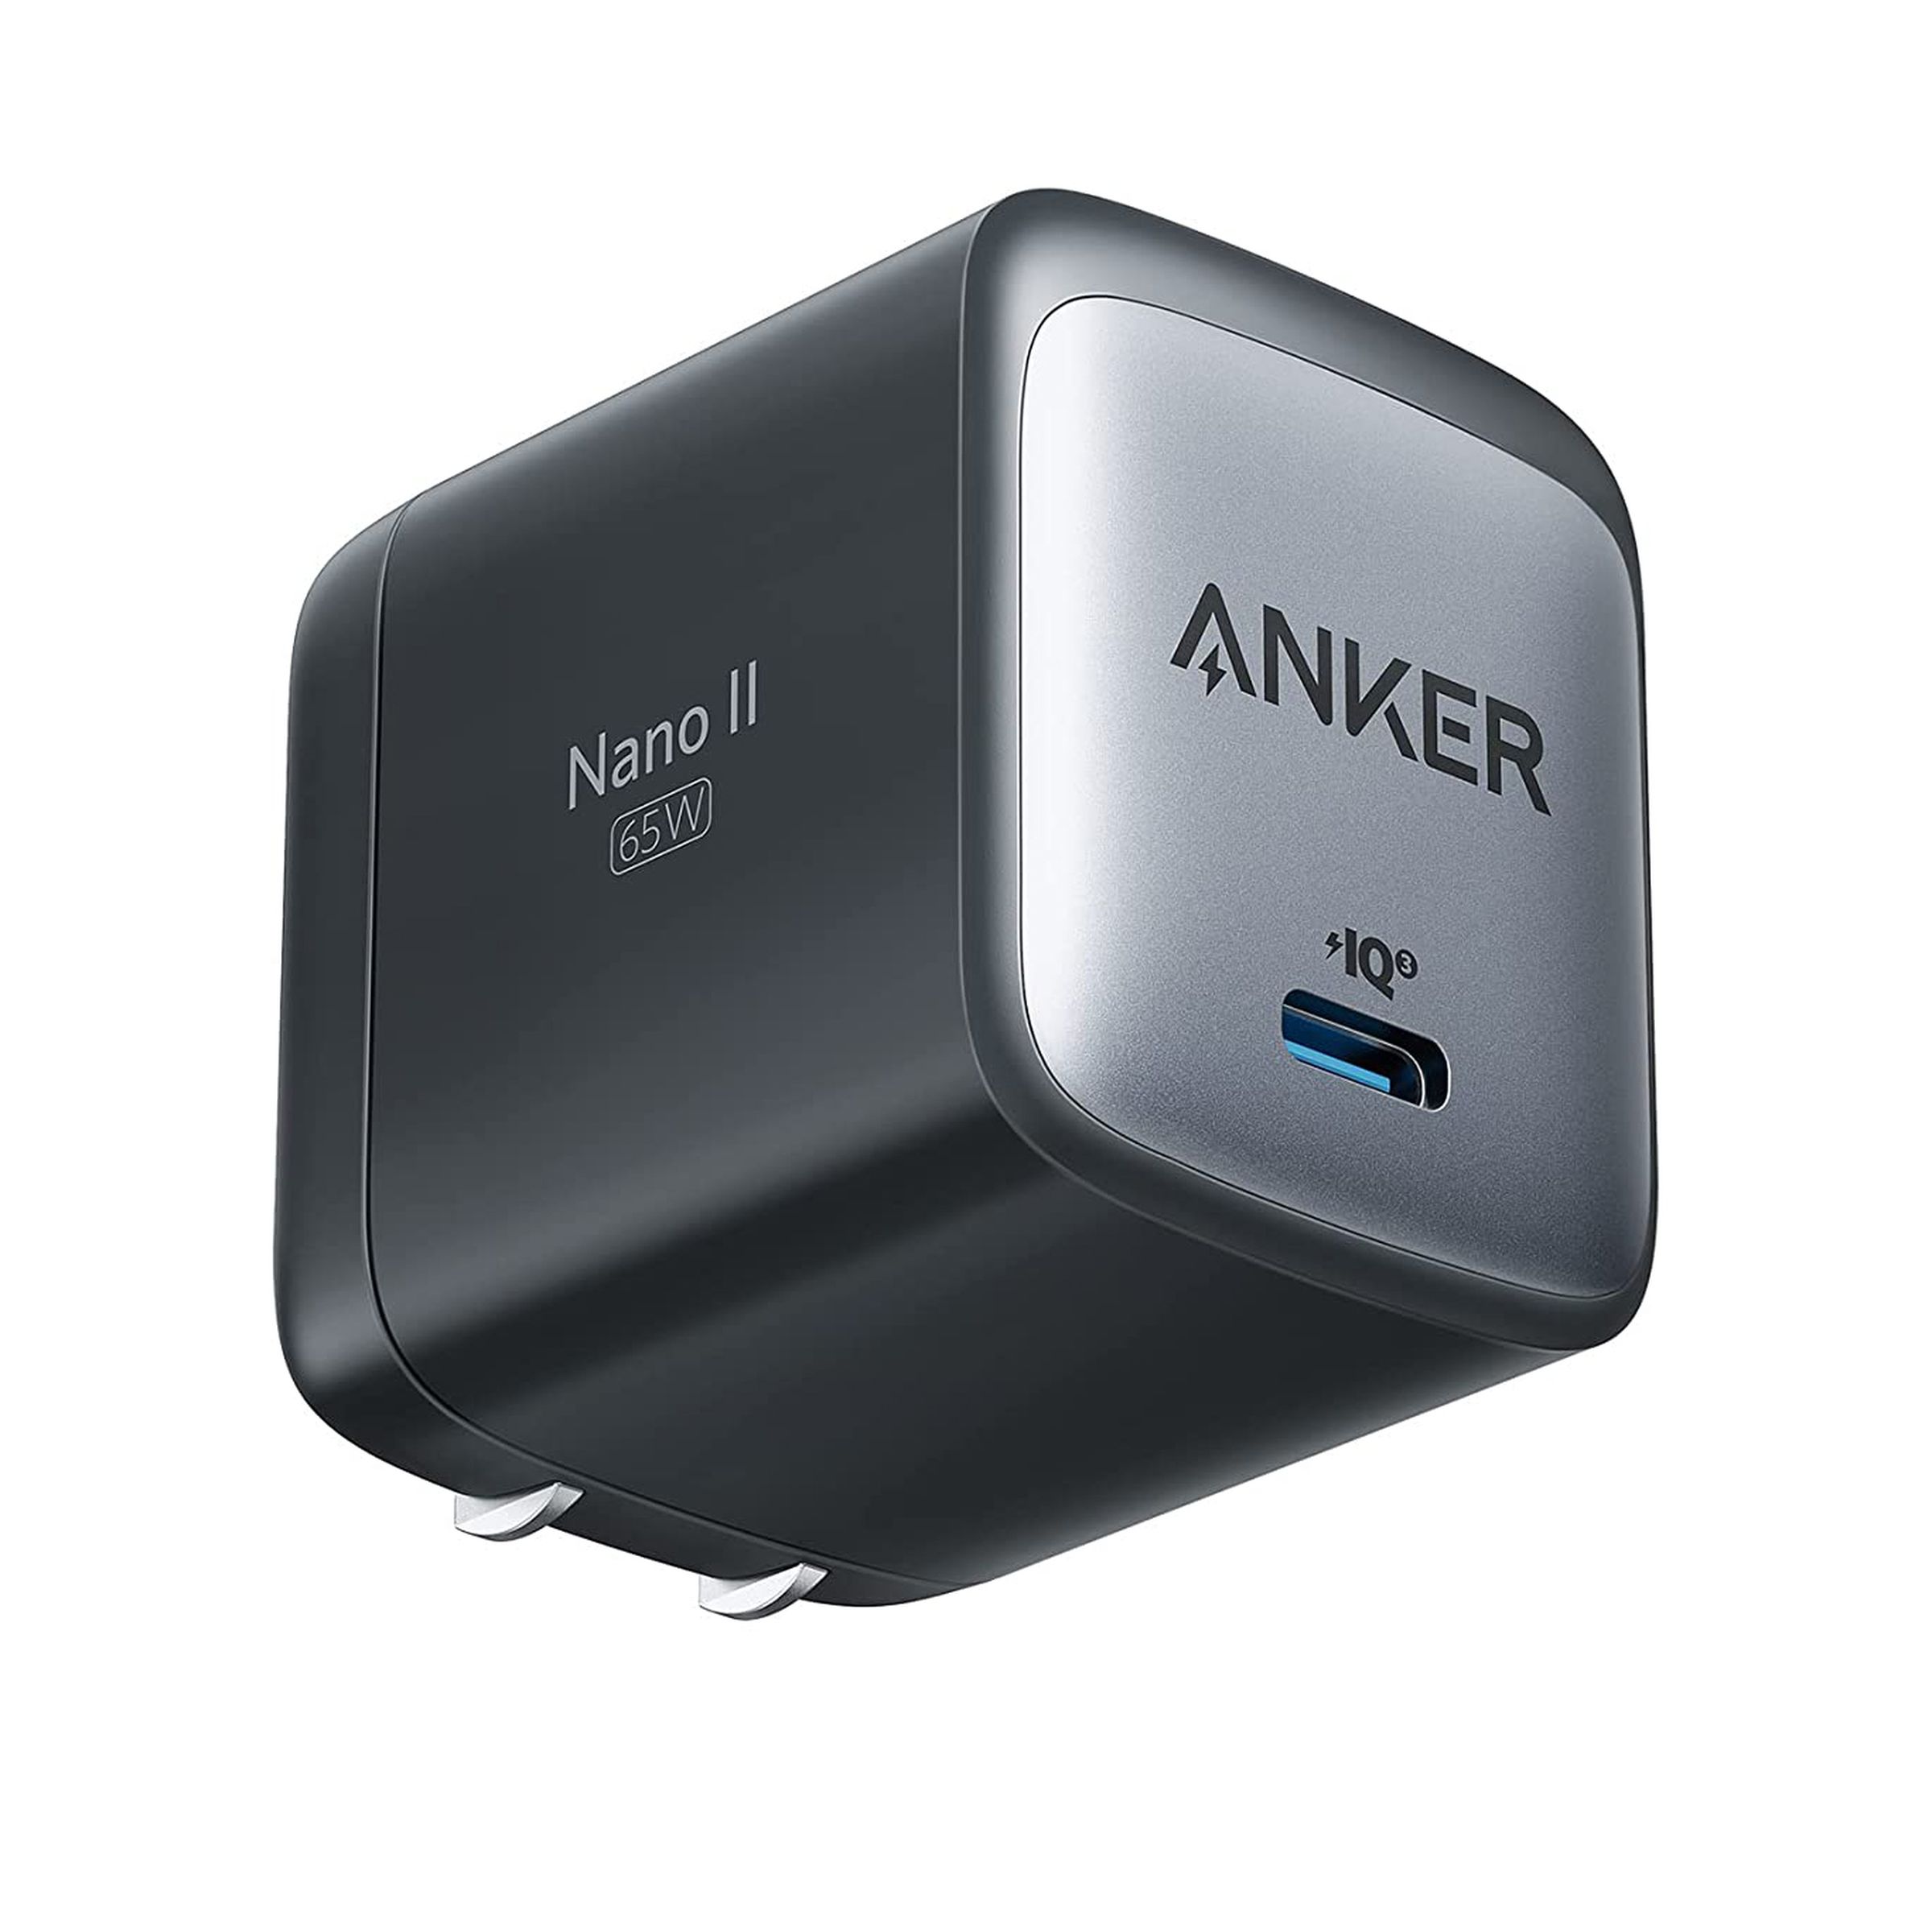 The Anker 65W USB C Charger on white background